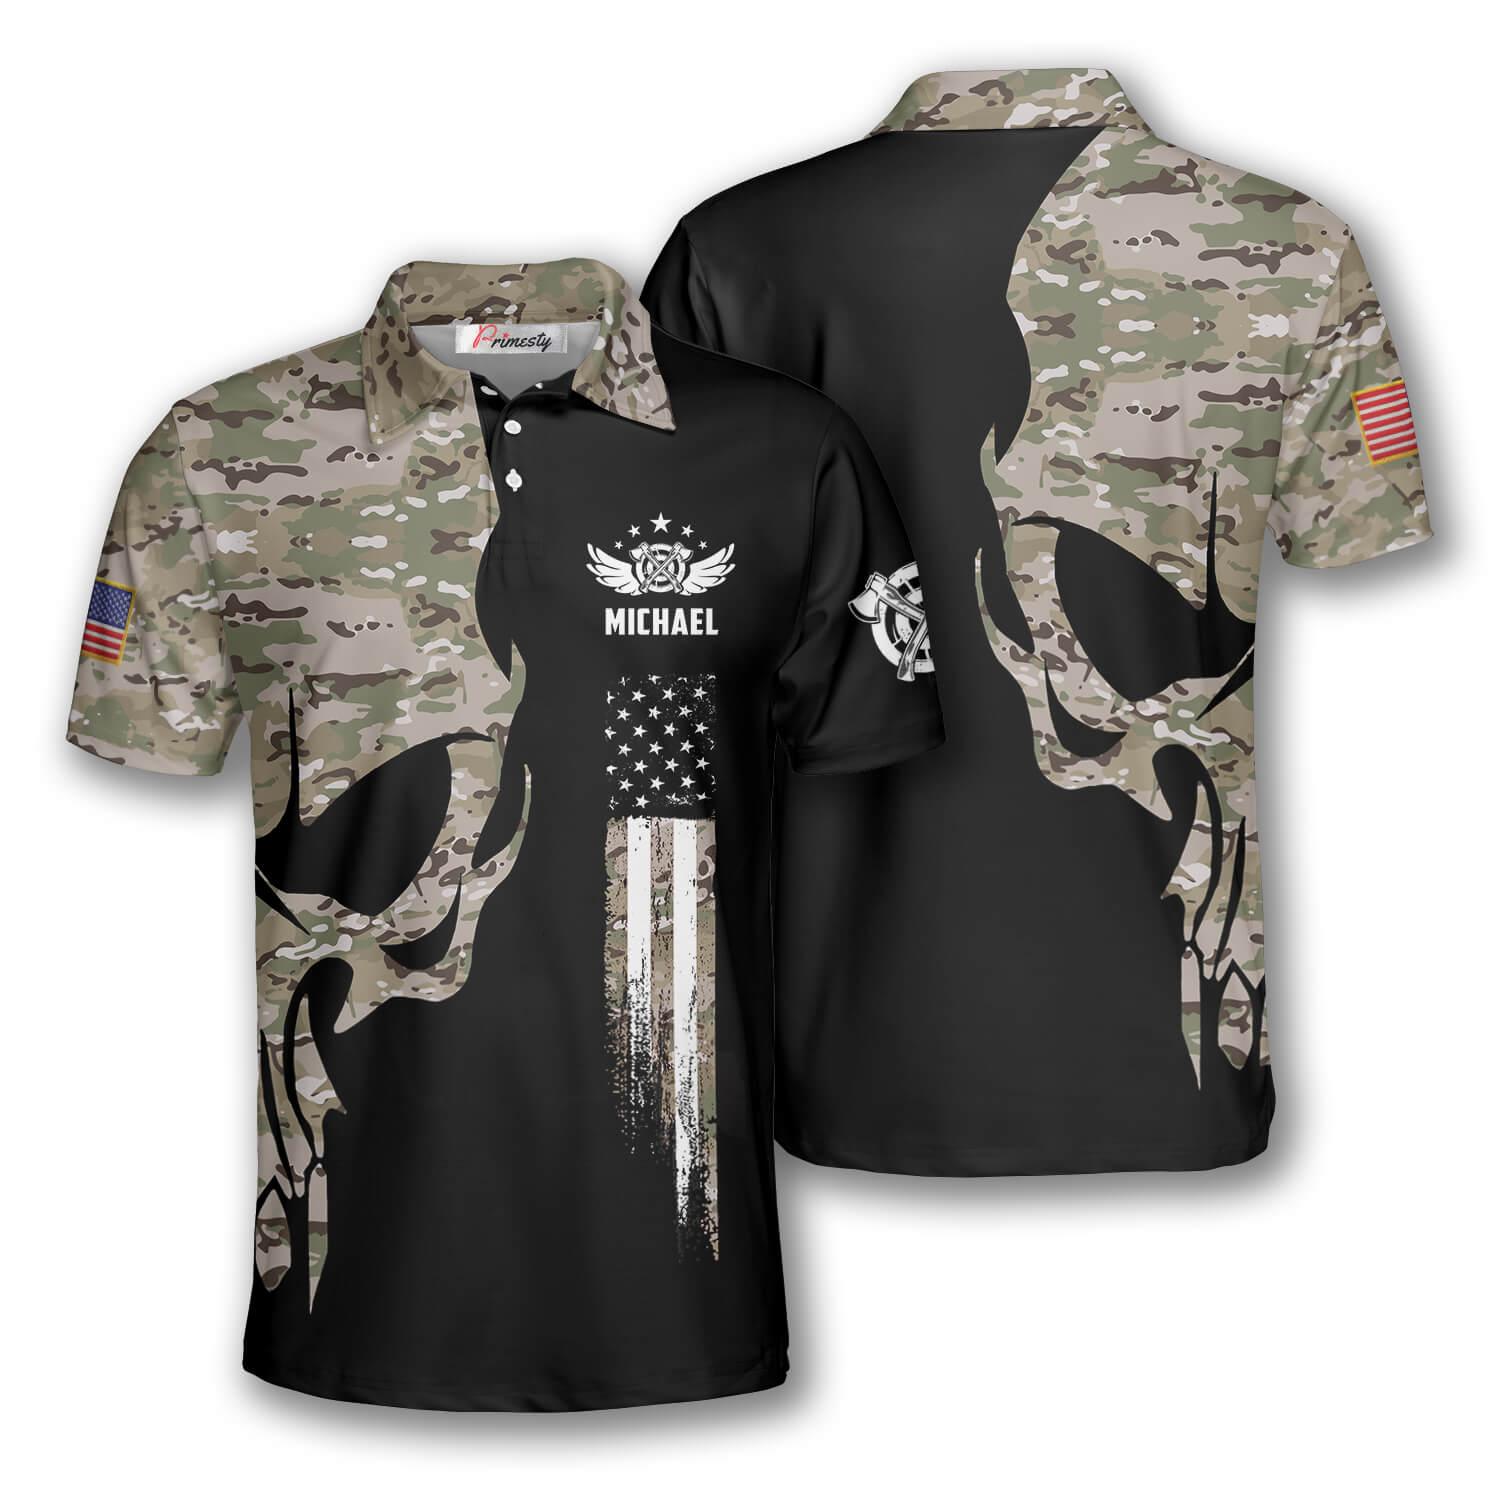 Axe Throwing Skull Camouflage Custom Axe Throwing Shirts for Men - Primesty